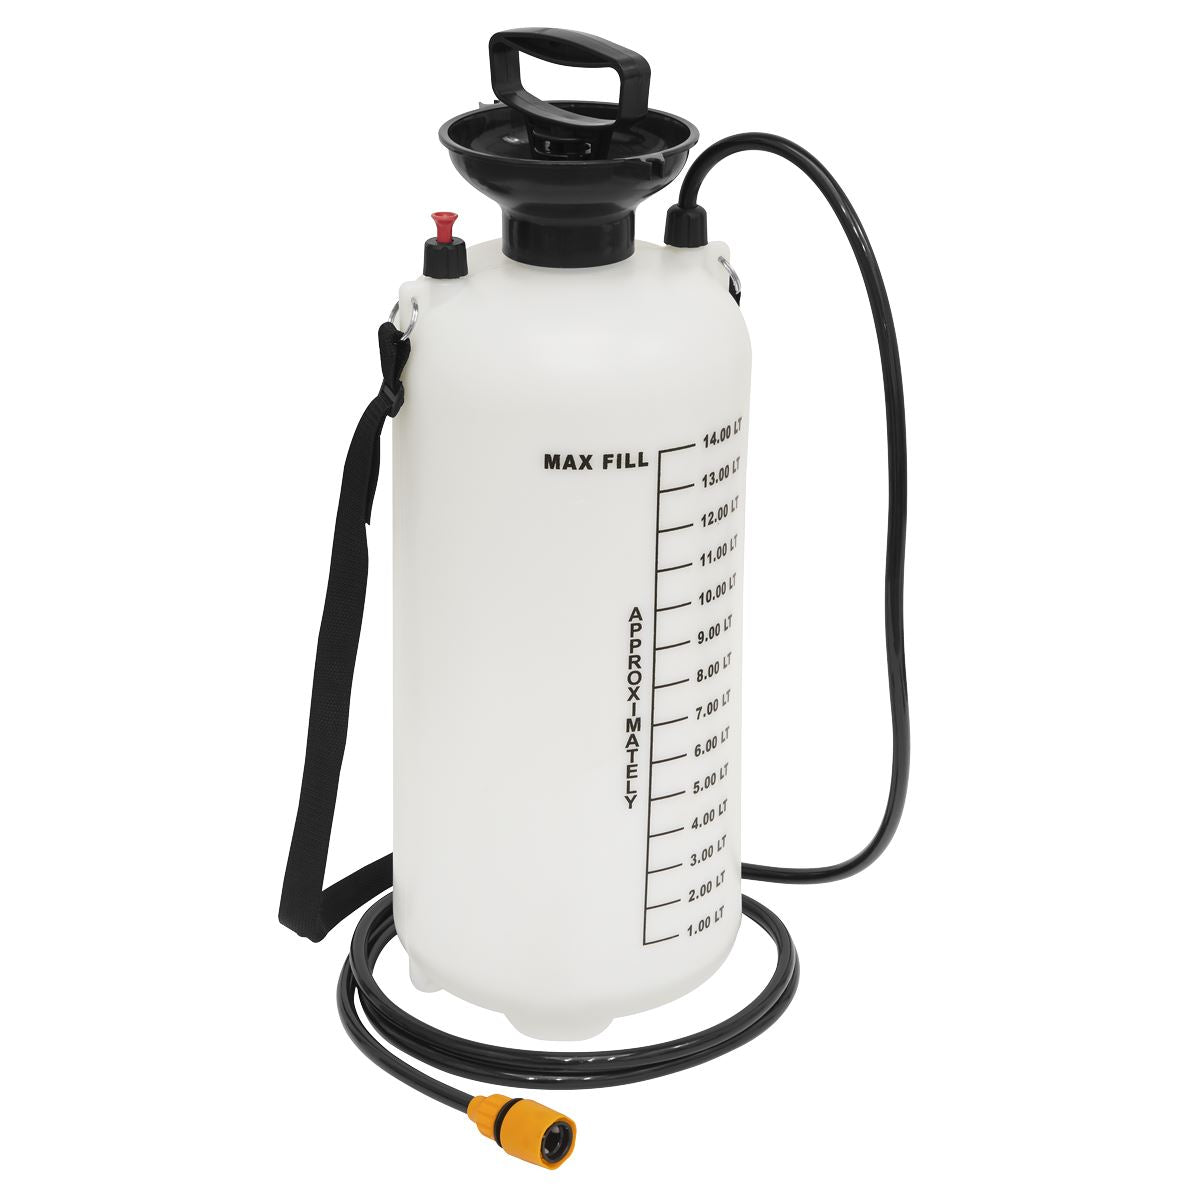 Worksafe by Sealey Dust Suppression Water Tank 14L